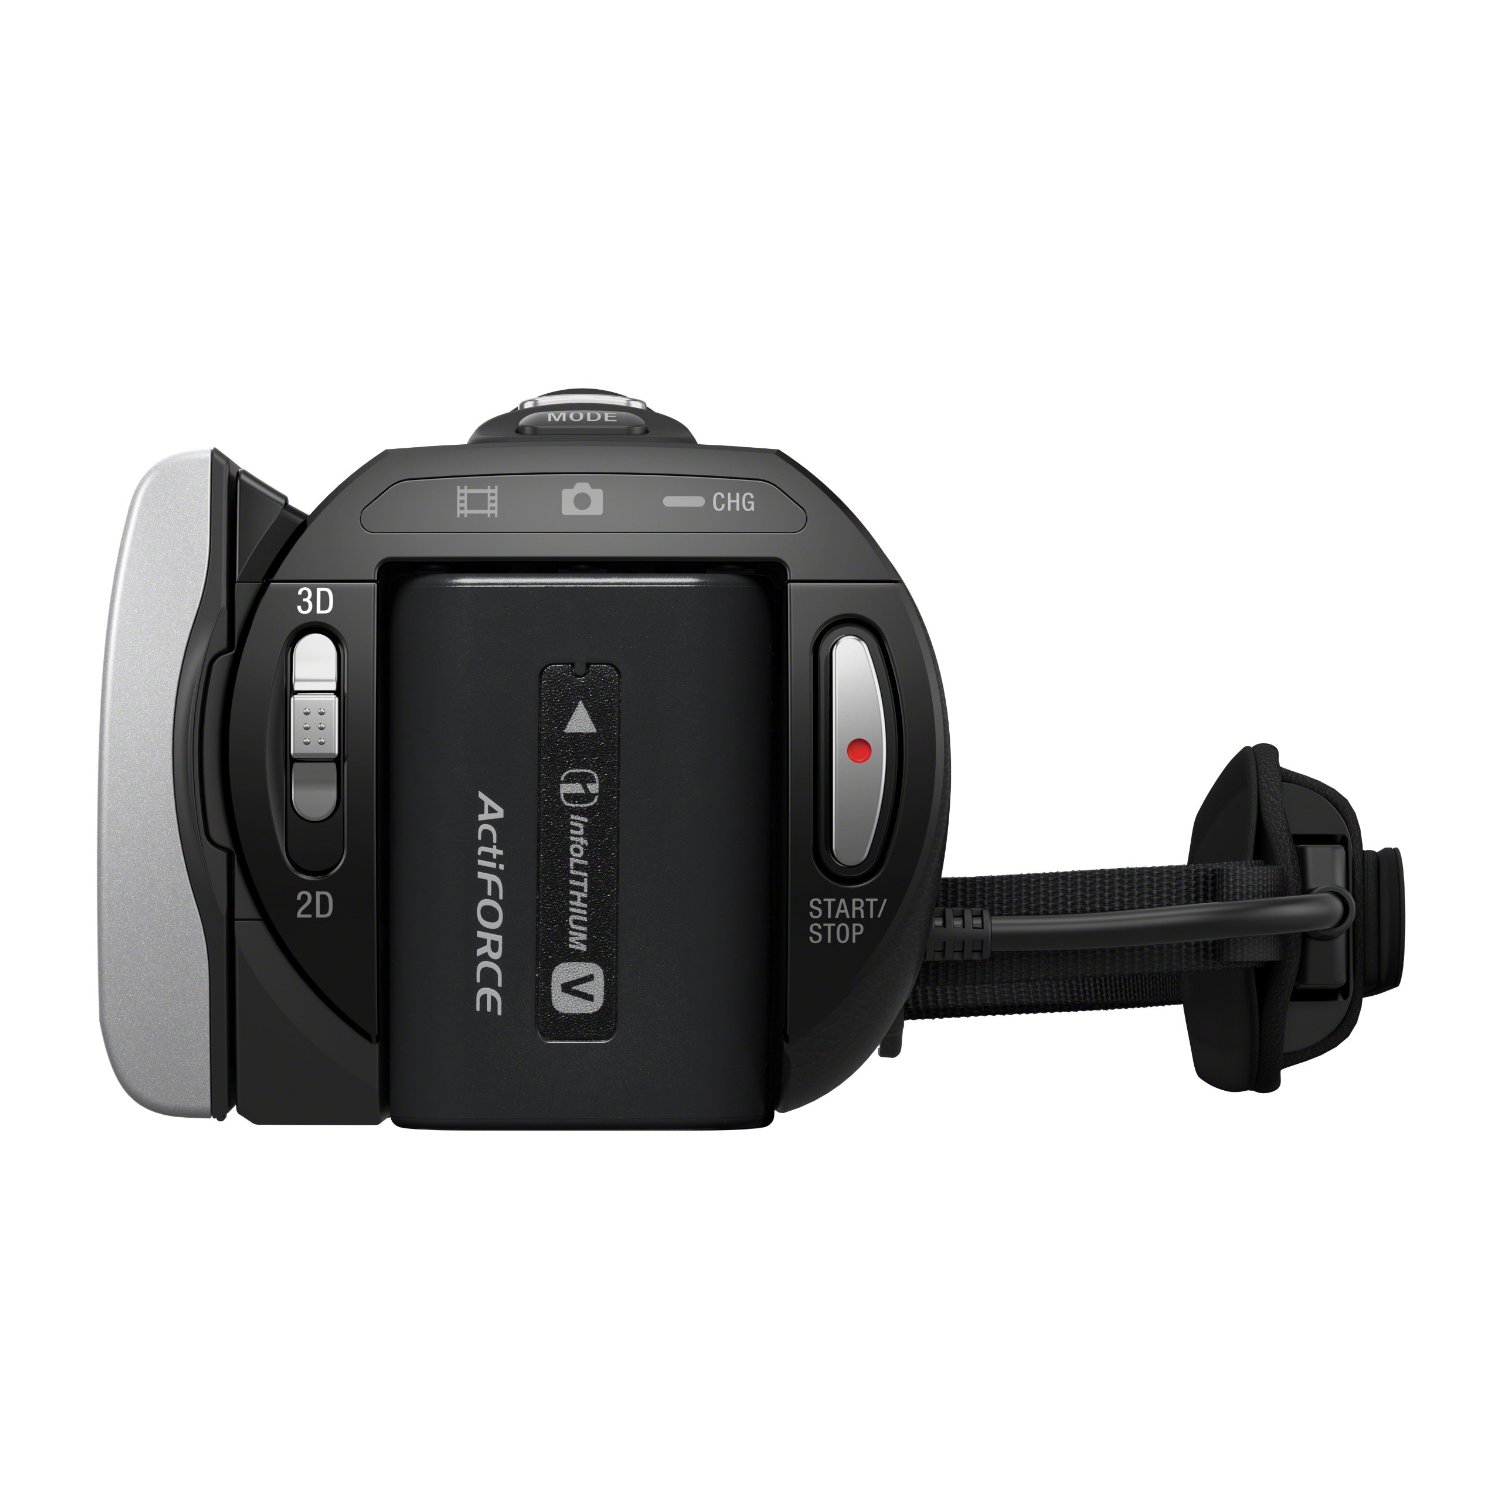 http://thetechjournal.com/wp-content/uploads/images/1203/1333213211-sony-hdrtd20v-hd-handycam-204-mp-3d-camcorder-11.jpg